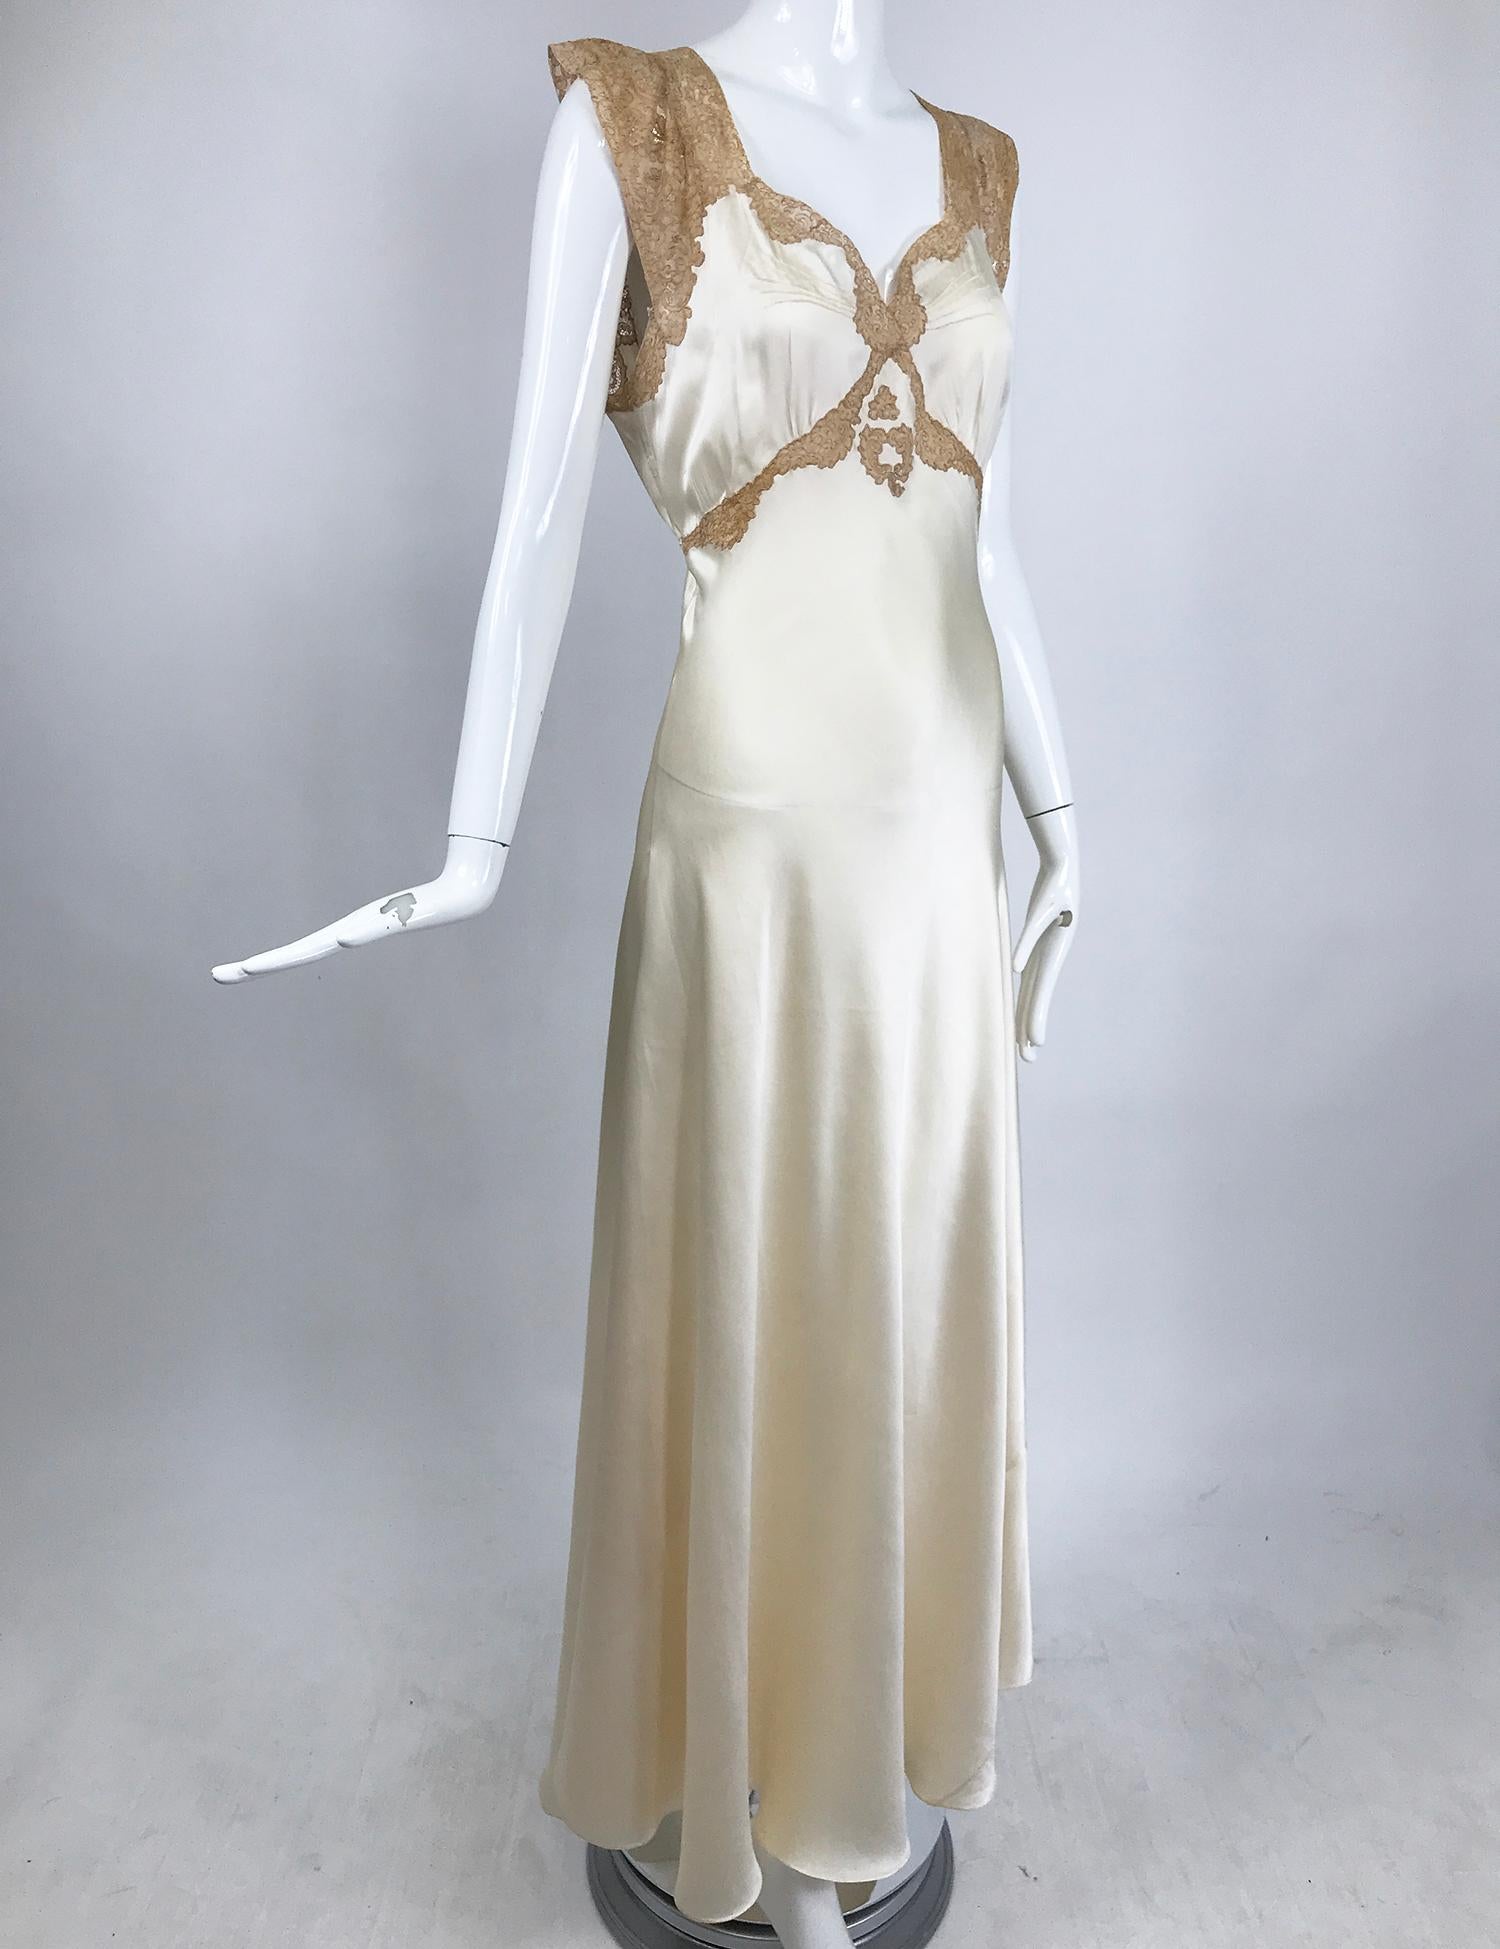 1930s cream silk charmeuse bias cut couture gown with ecru lace trim. This beautiful gown is beautifully hand made, the neckline is ecru re-embroidered alencon lace, perfectly cut and pieced and attached by hand with silk thread. The bodice has a V